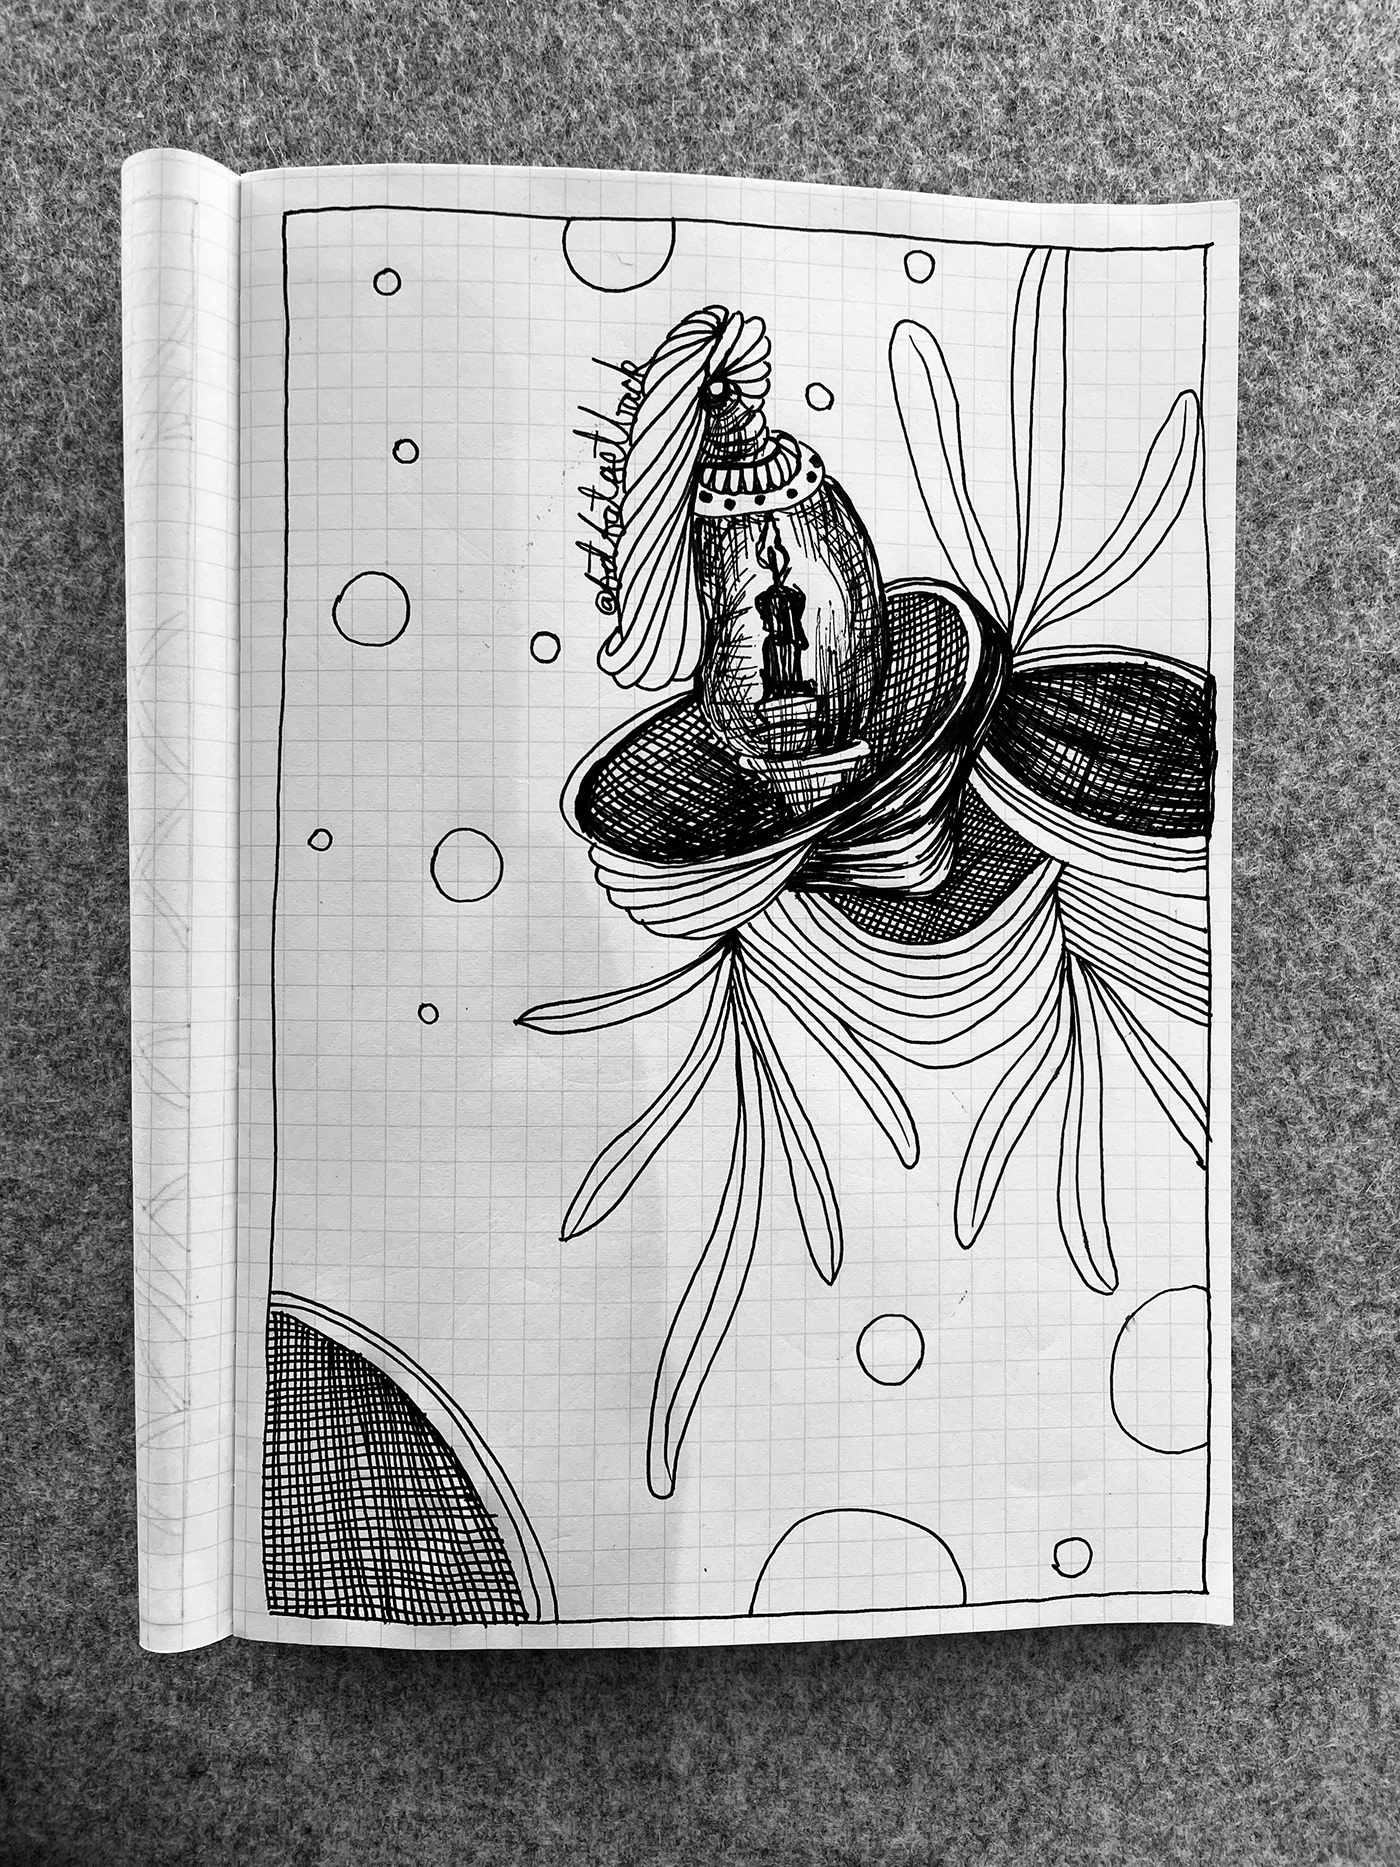 linework lineart linedrawing blackpen blackandwhite abstractart monster OnceUponaTime universe BeingHuman penandpaper   Zendoodle sketch quicksketch dailysketch handdrawings pendrawing art pieces backtopaper fatfatgetback linedoodle OUTTASPACE paperdrawing recording memories